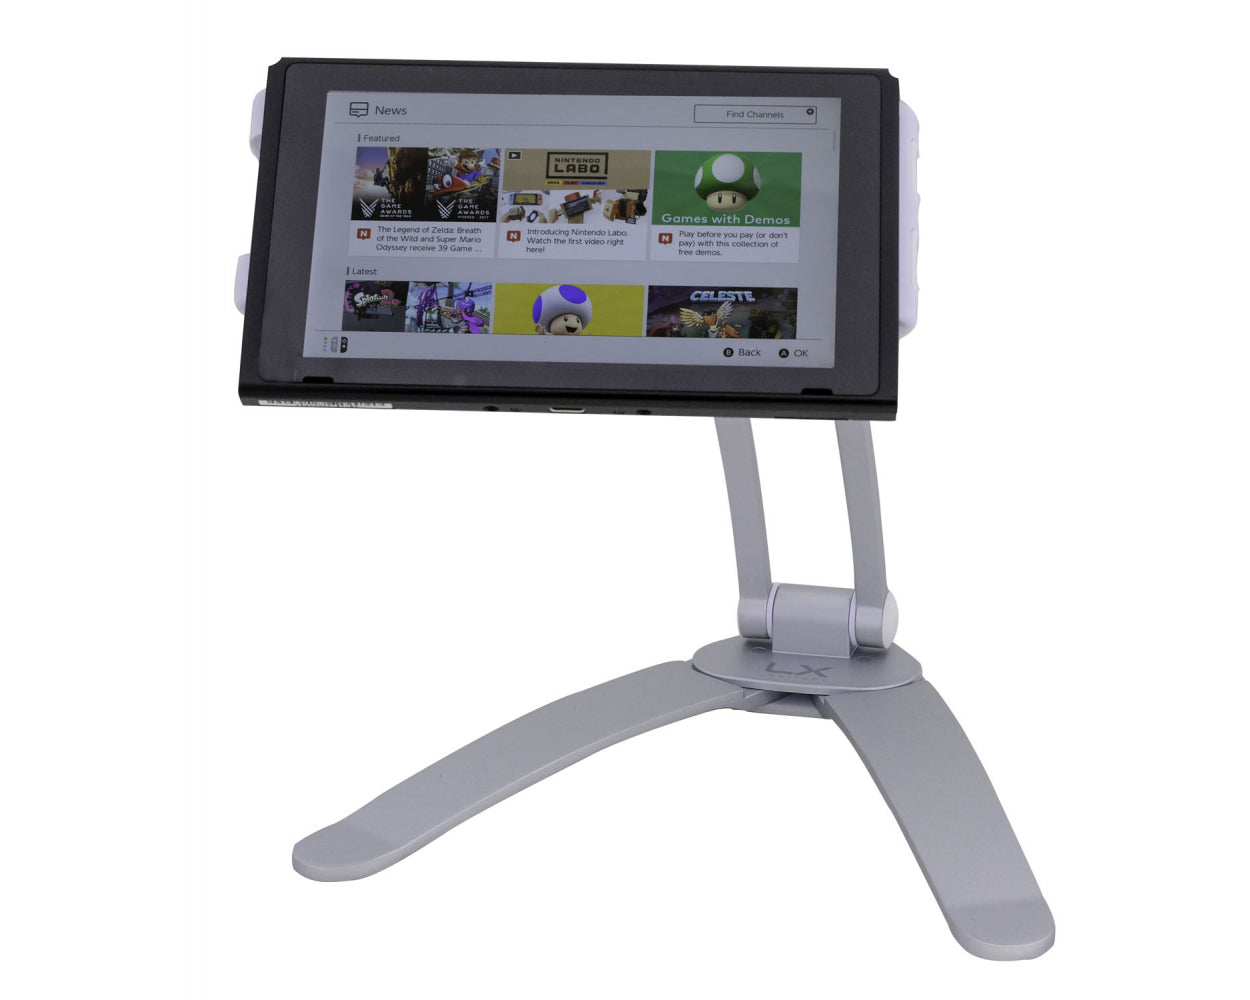 Luxitude 2-in-1 Tablet & Phone Holder/ Stand, Perfect for Smart Phones, E-Readers, Nintendo Switch & Tablets, Permanent or Temporary Mounting Solution